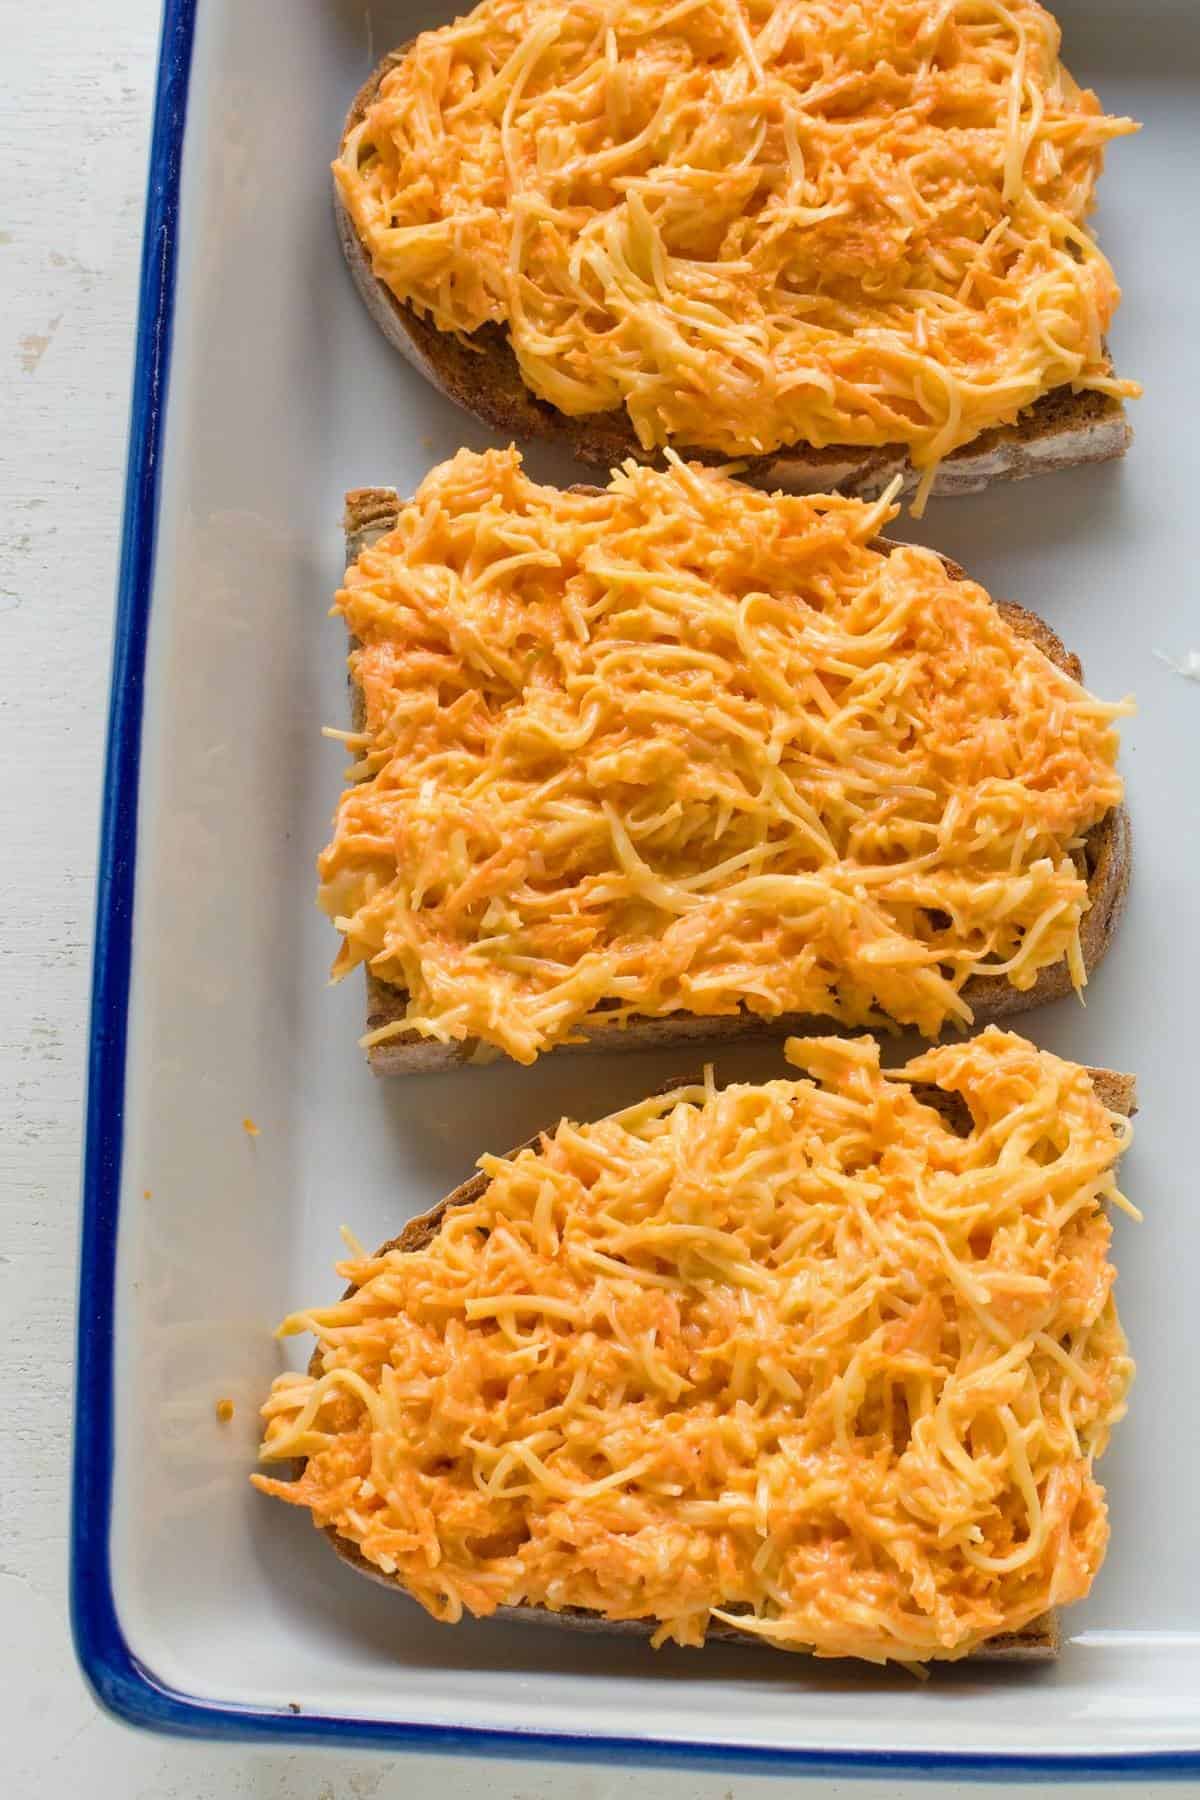 Slices of bread topped with carrot-cheese spread.